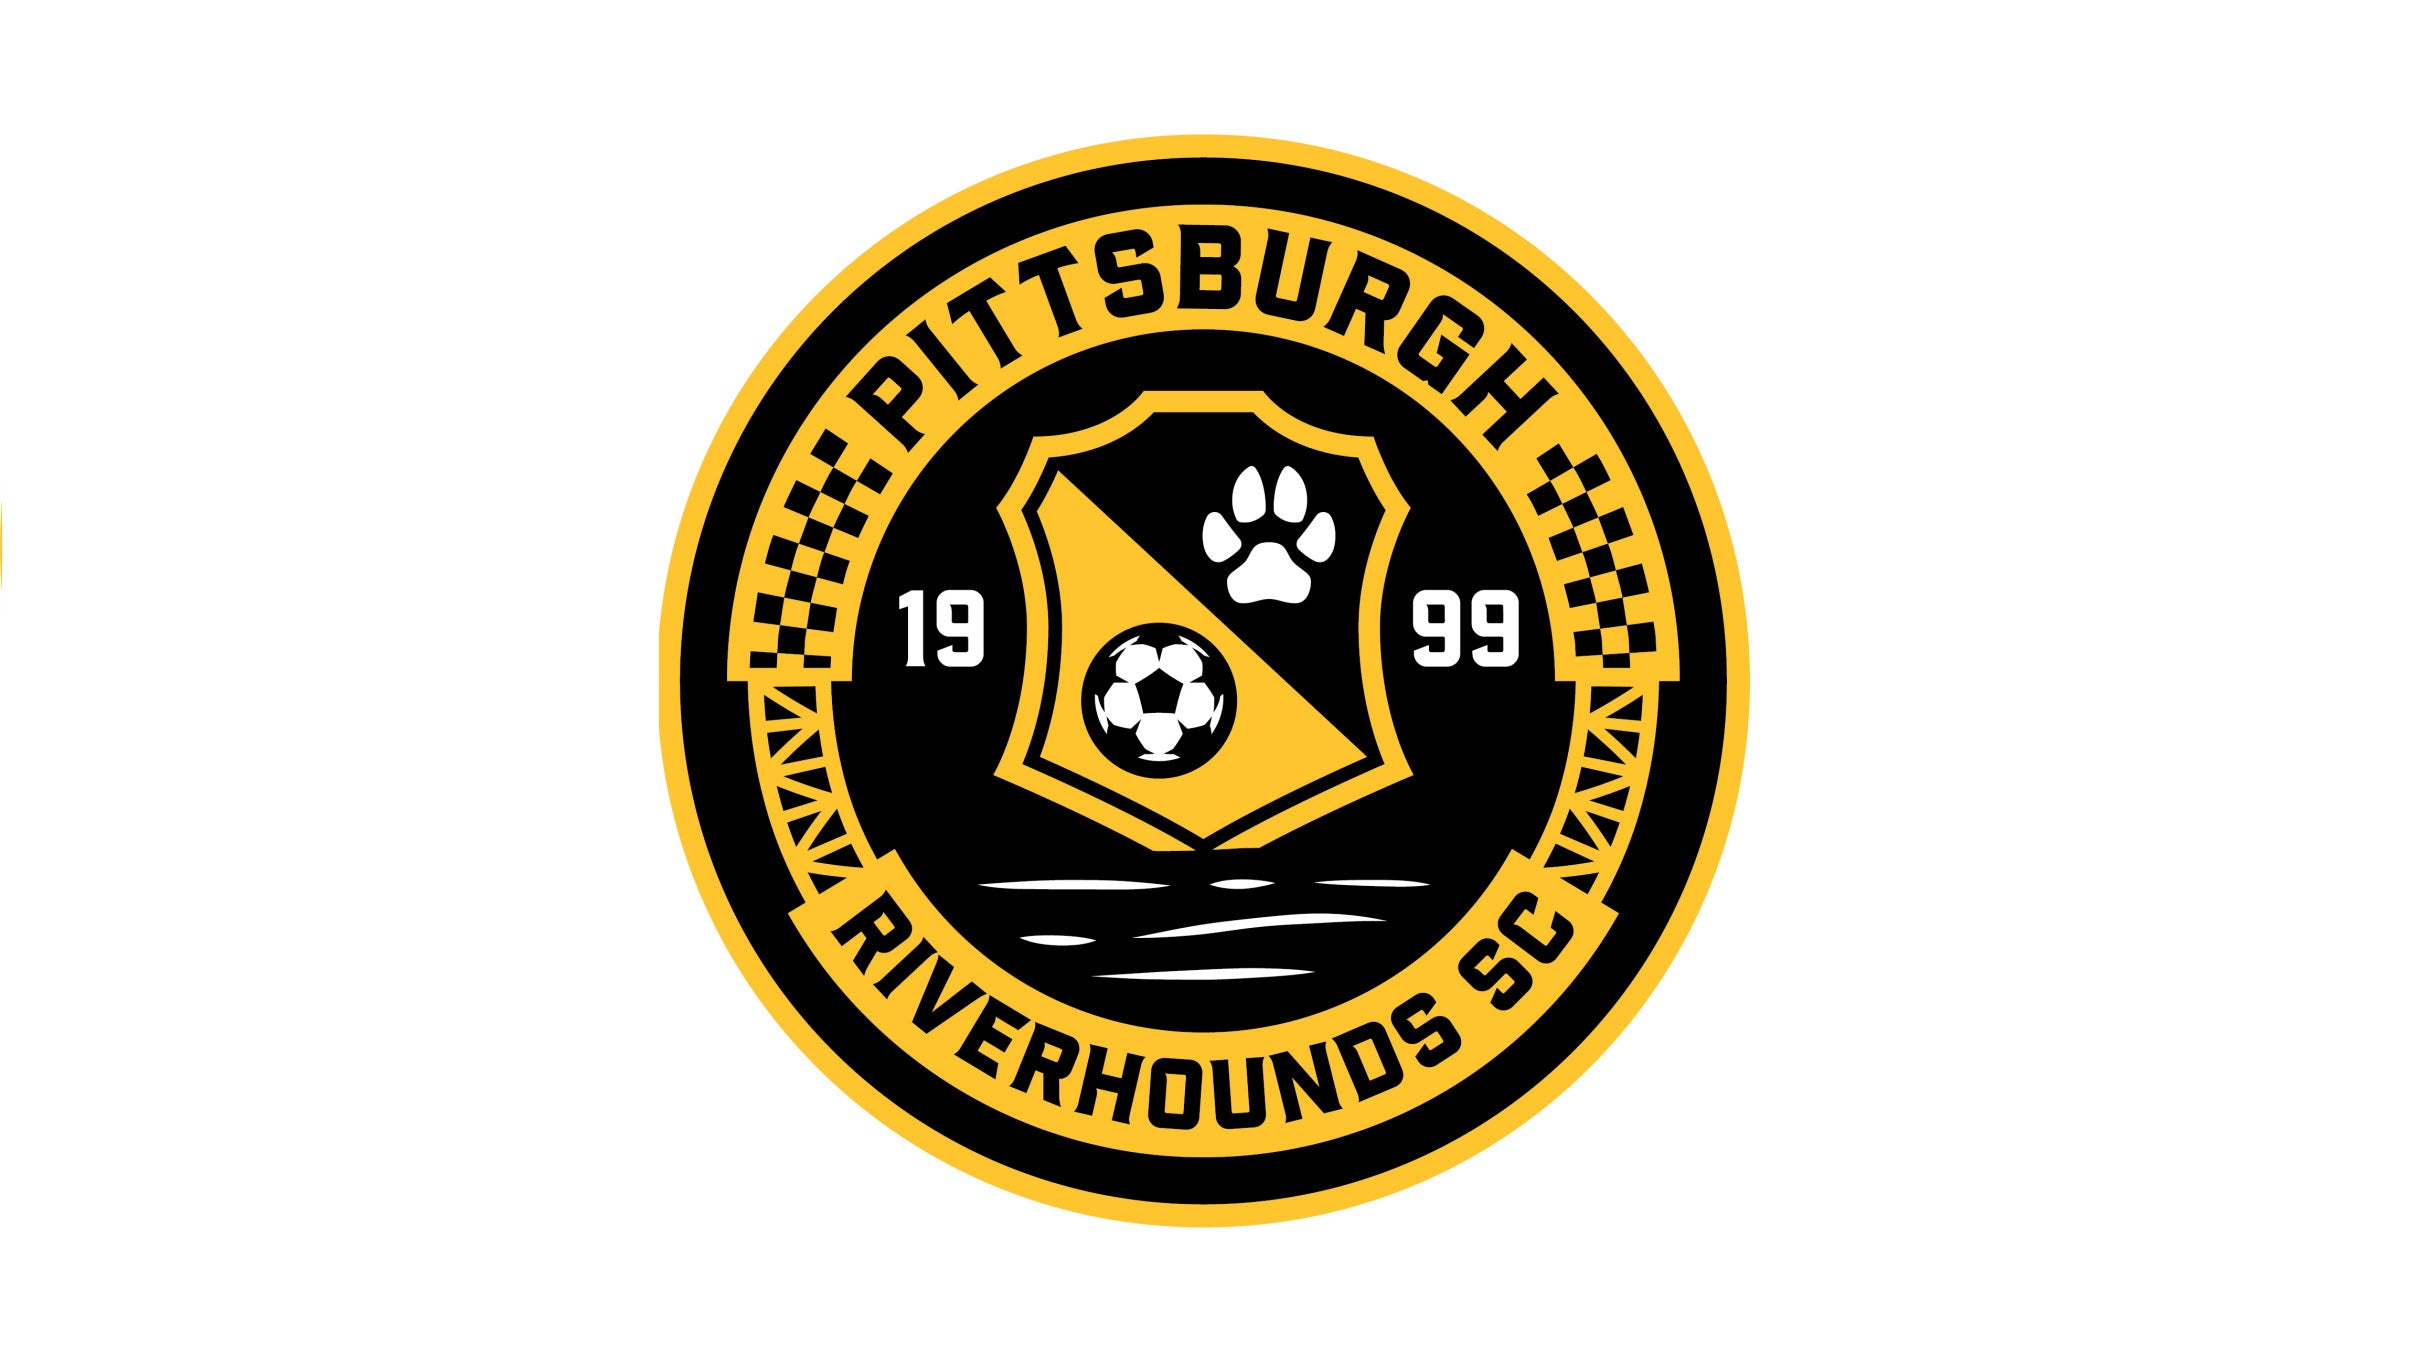 Pittsburgh Riverhounds SC vs. Indy Eleven